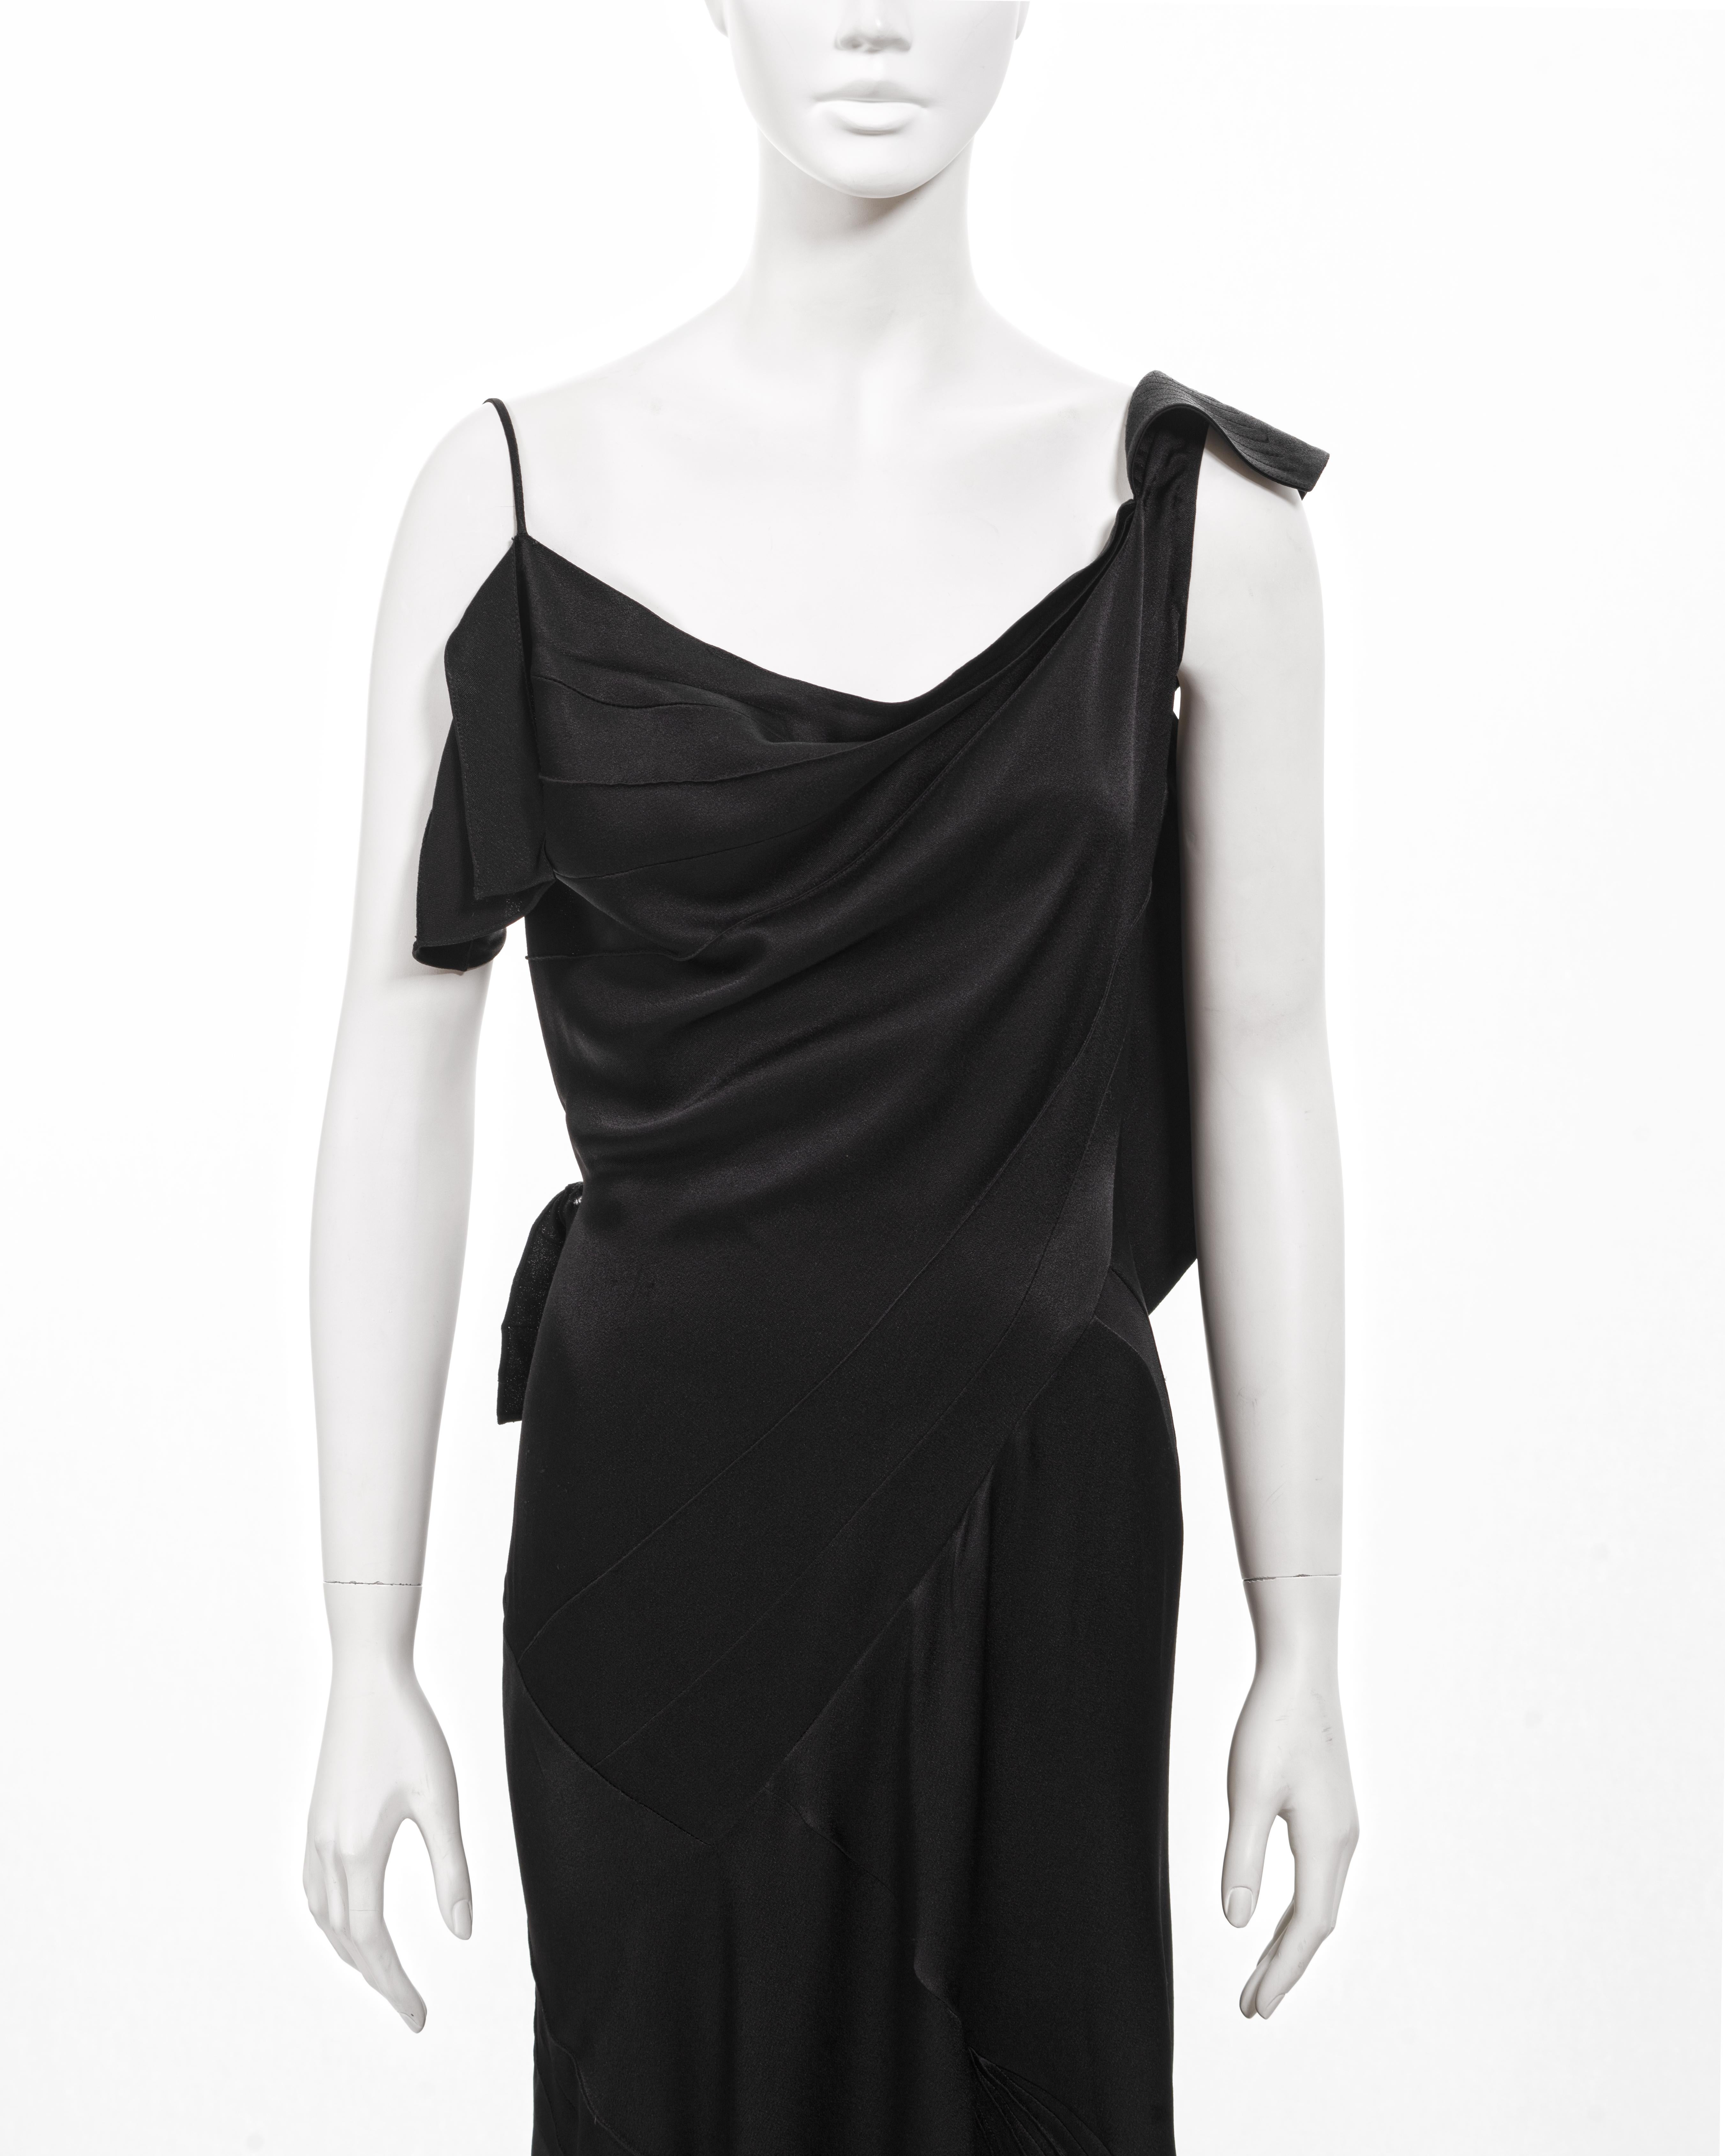 Christian Dior by John Galliano black bias-cut satin evening dress, fw 2000 In Excellent Condition For Sale In London, GB